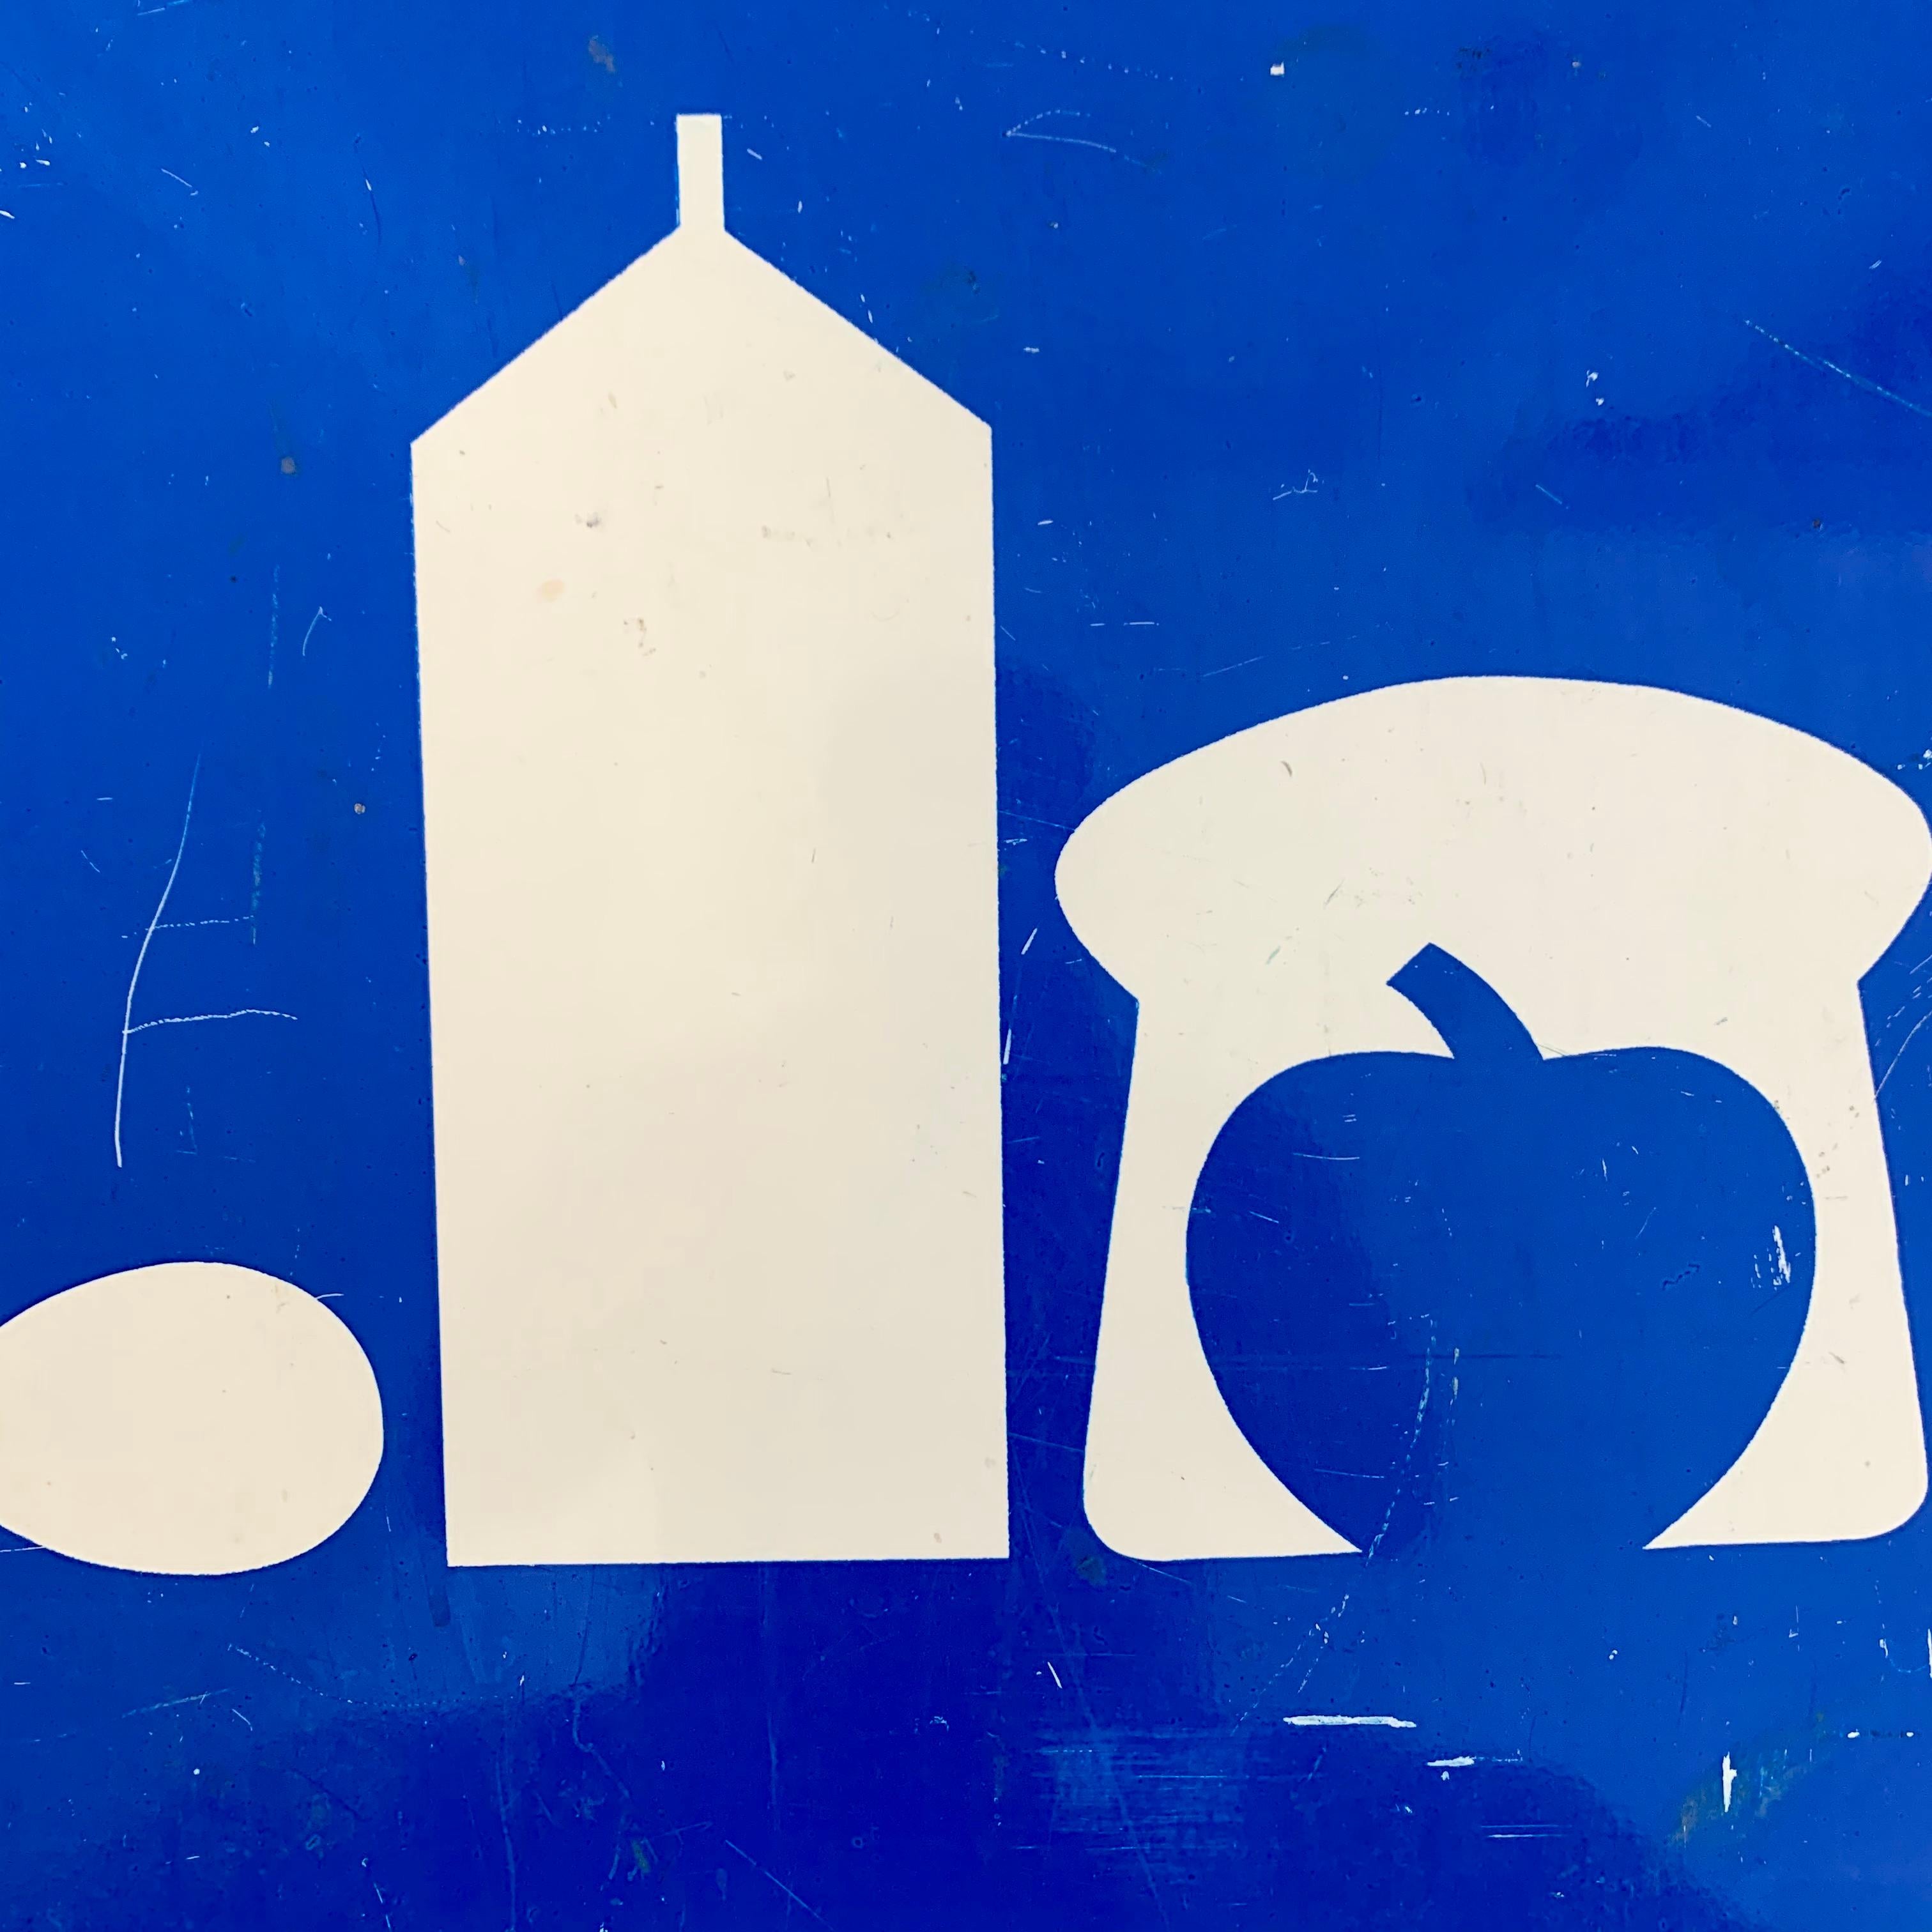 Rare blue and white metal sign taken down from a US highway. Sign shows images of an egg, carton of milk, bread and an apple. Sign was used to show drivers that there is a market ahead. Sign is 2 feet by 2 feet. Cool piece of transportation history.